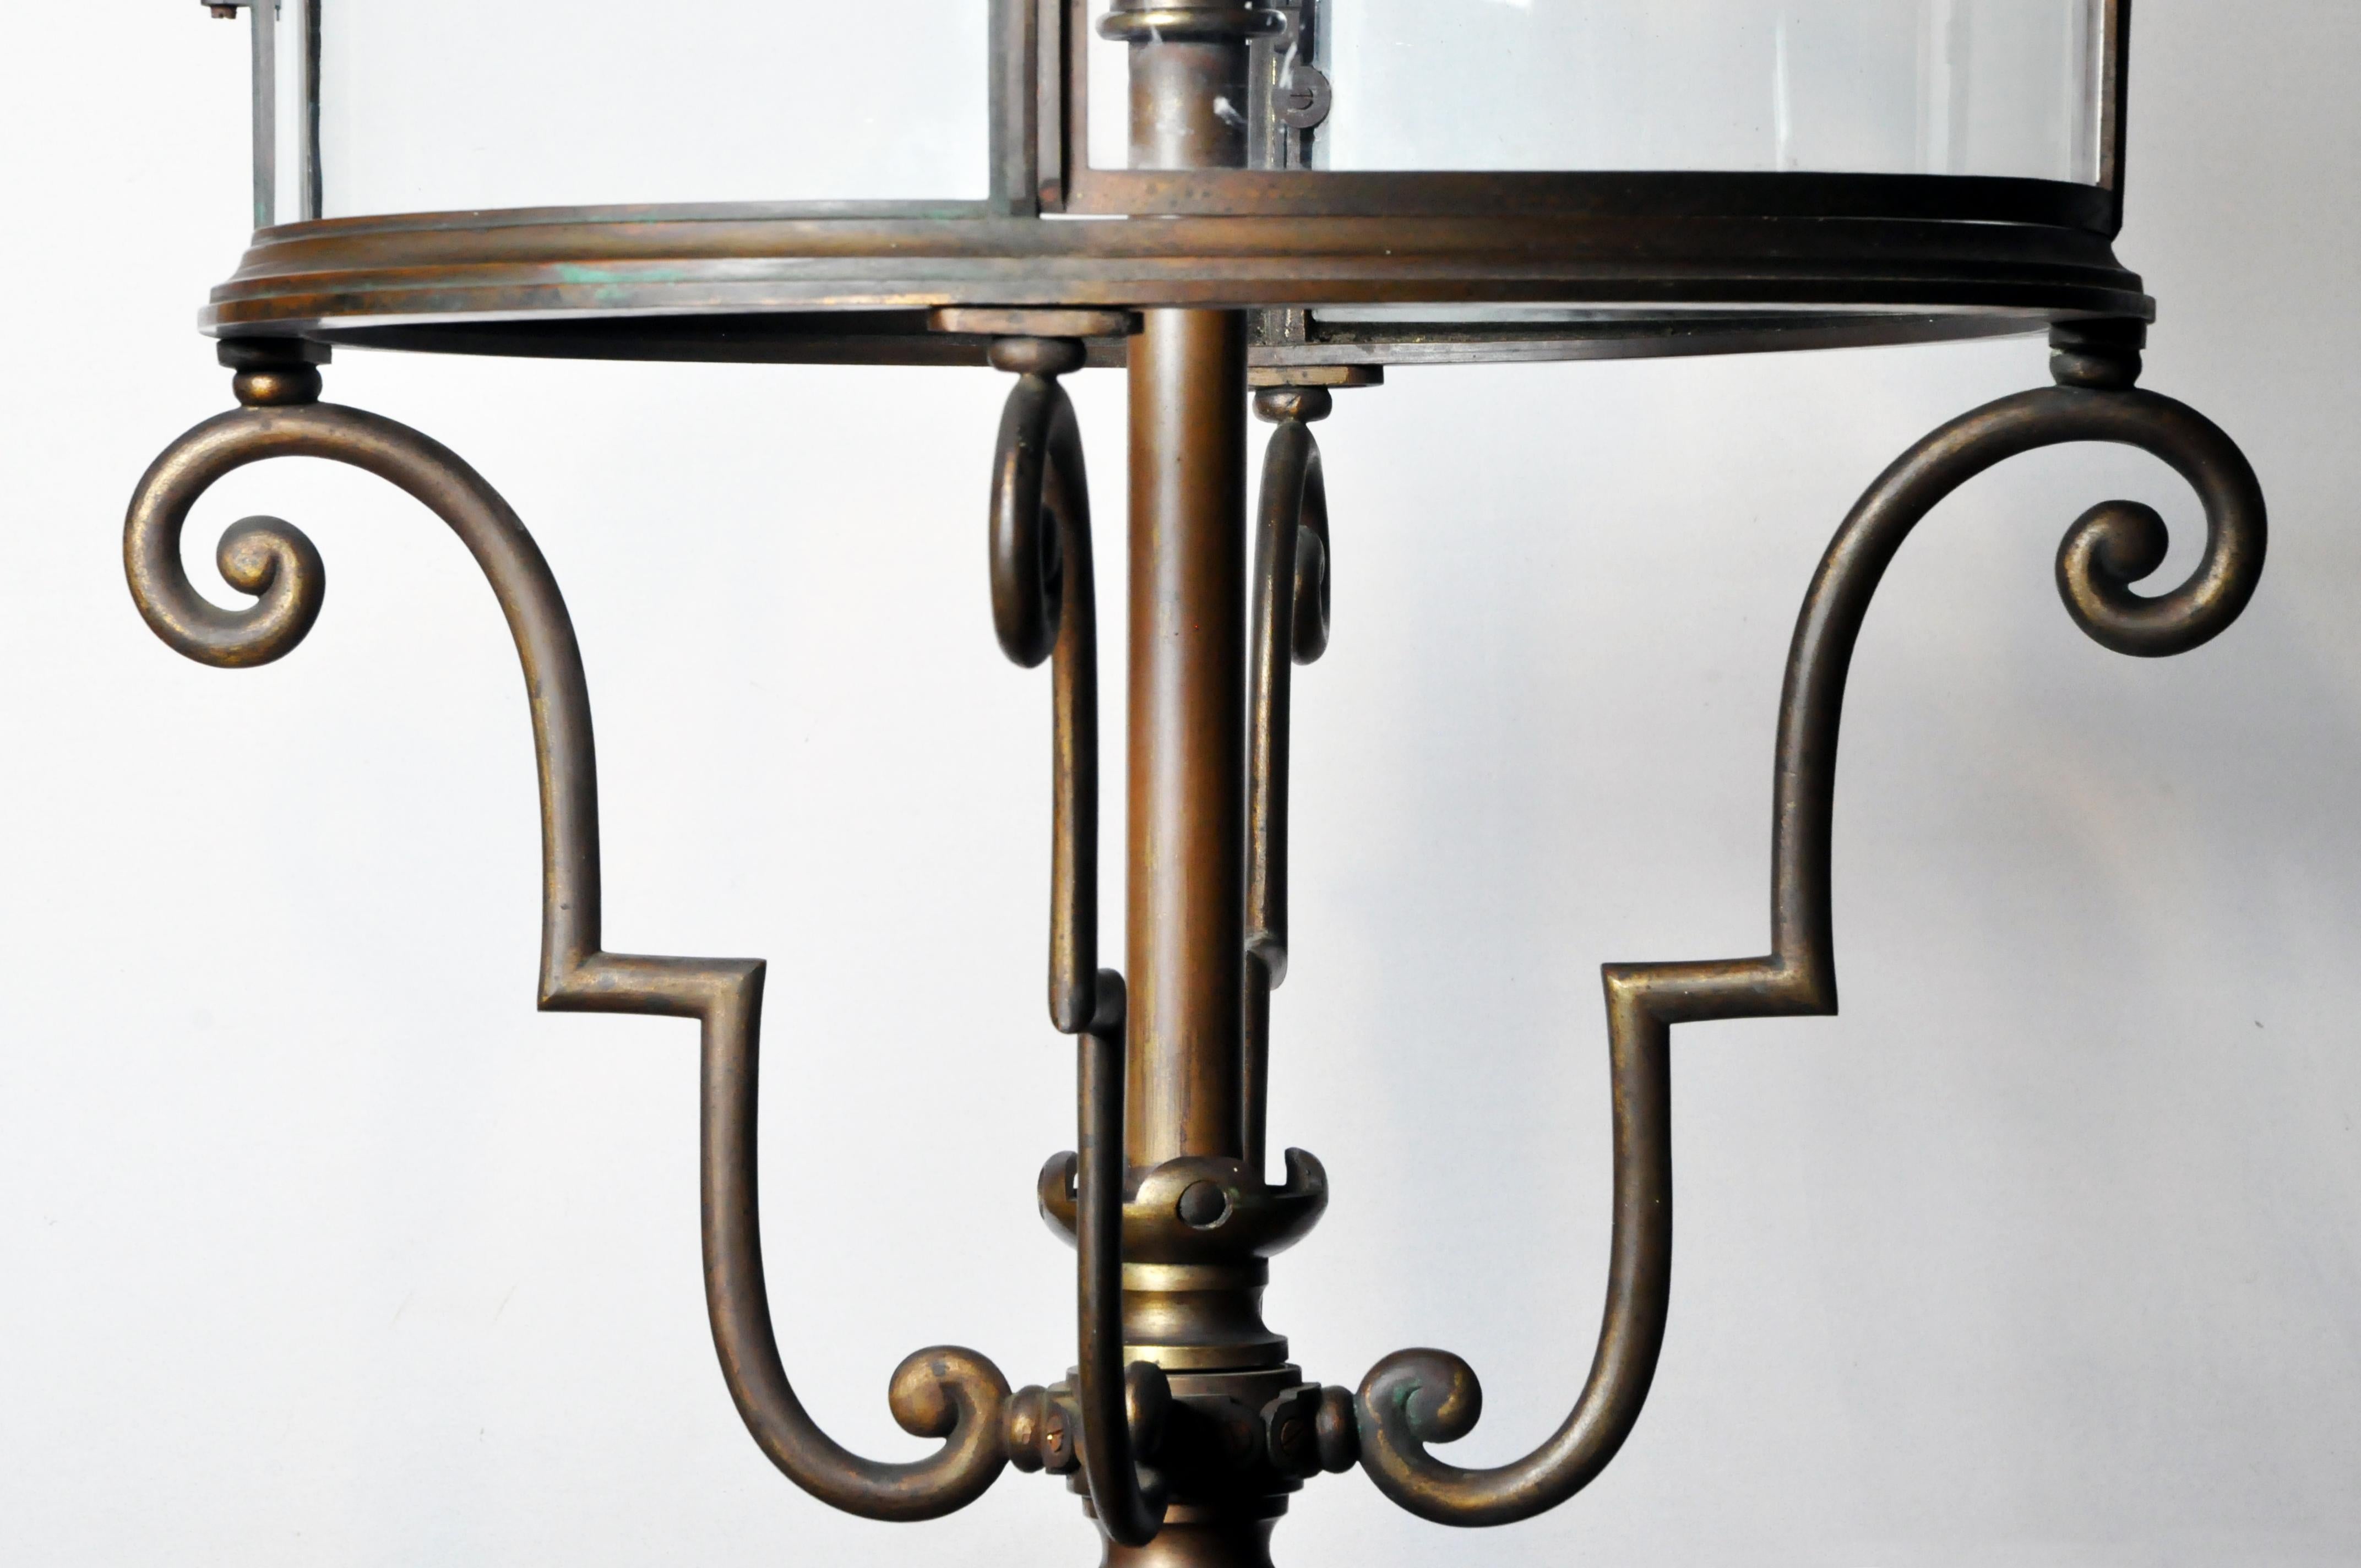 French Provincial French Chateau Lantern